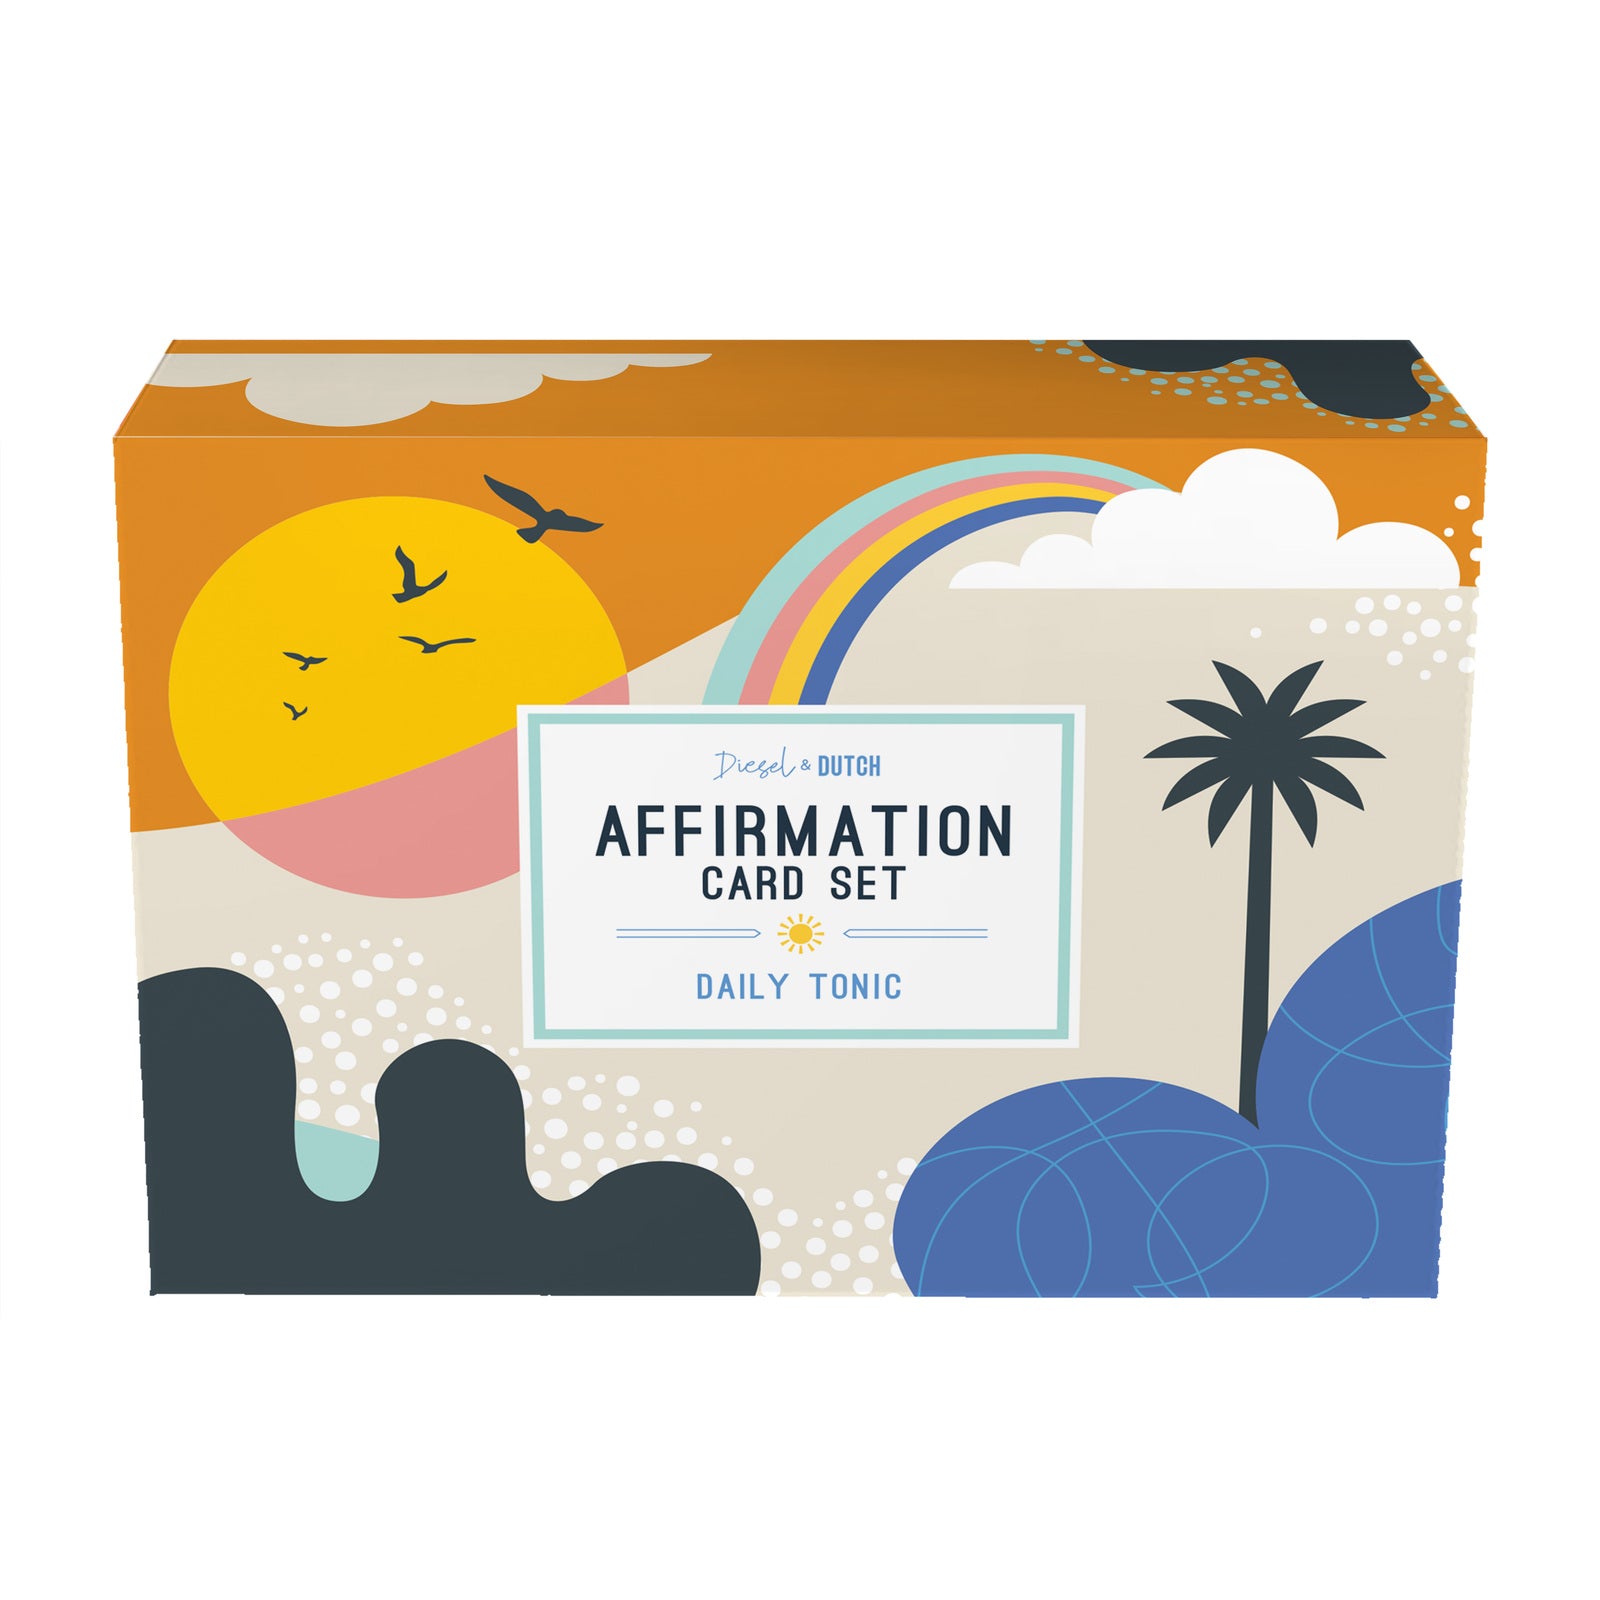 Affirmation Cards - Daily Tonic